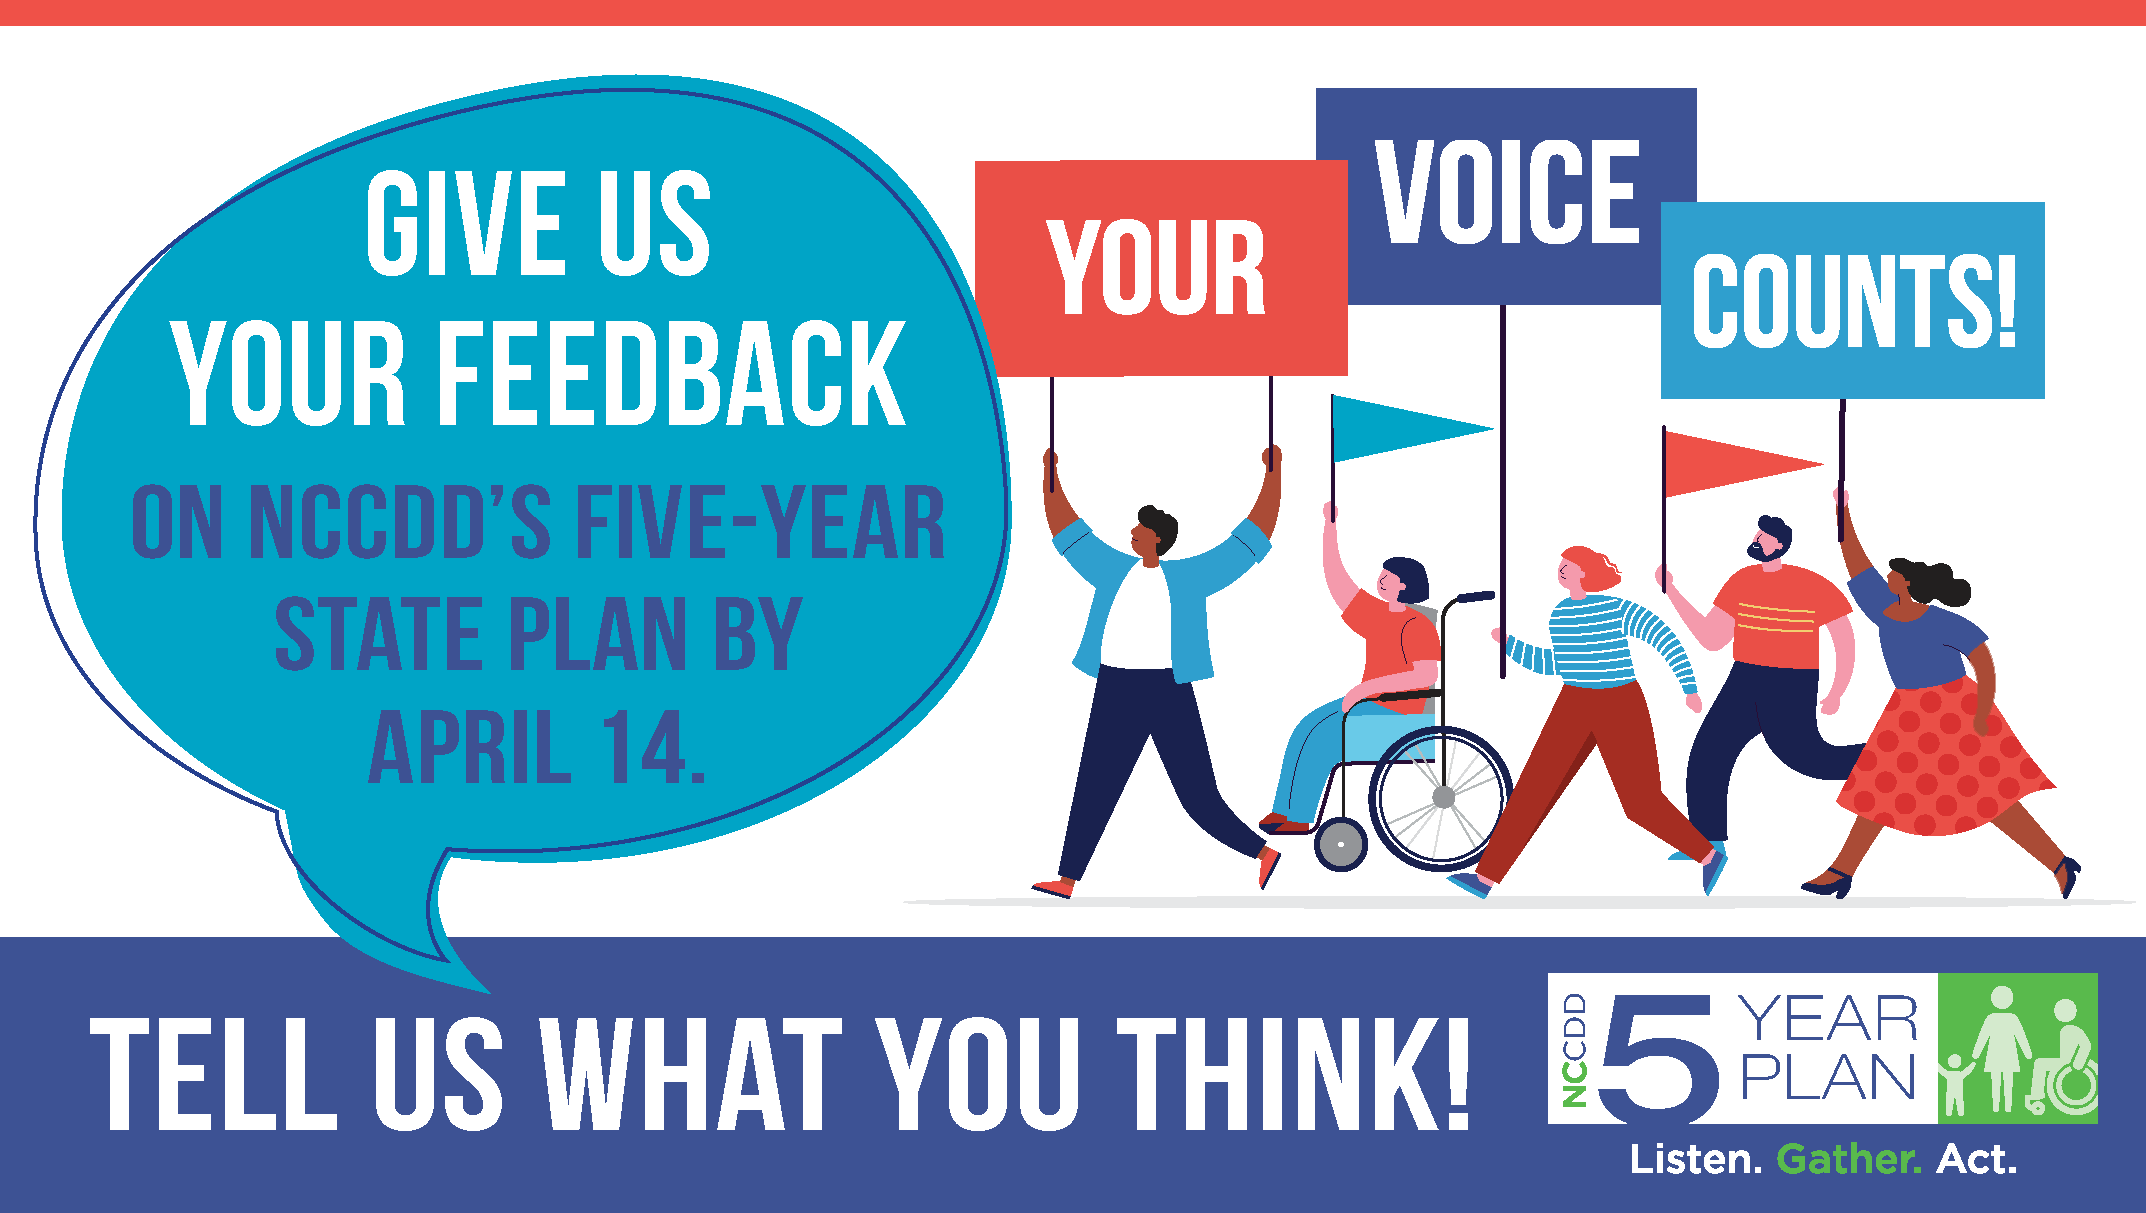 Five-Year State Plan Give Us Your Feedback graphic with people marching holding signs saying Your Voice Counts!